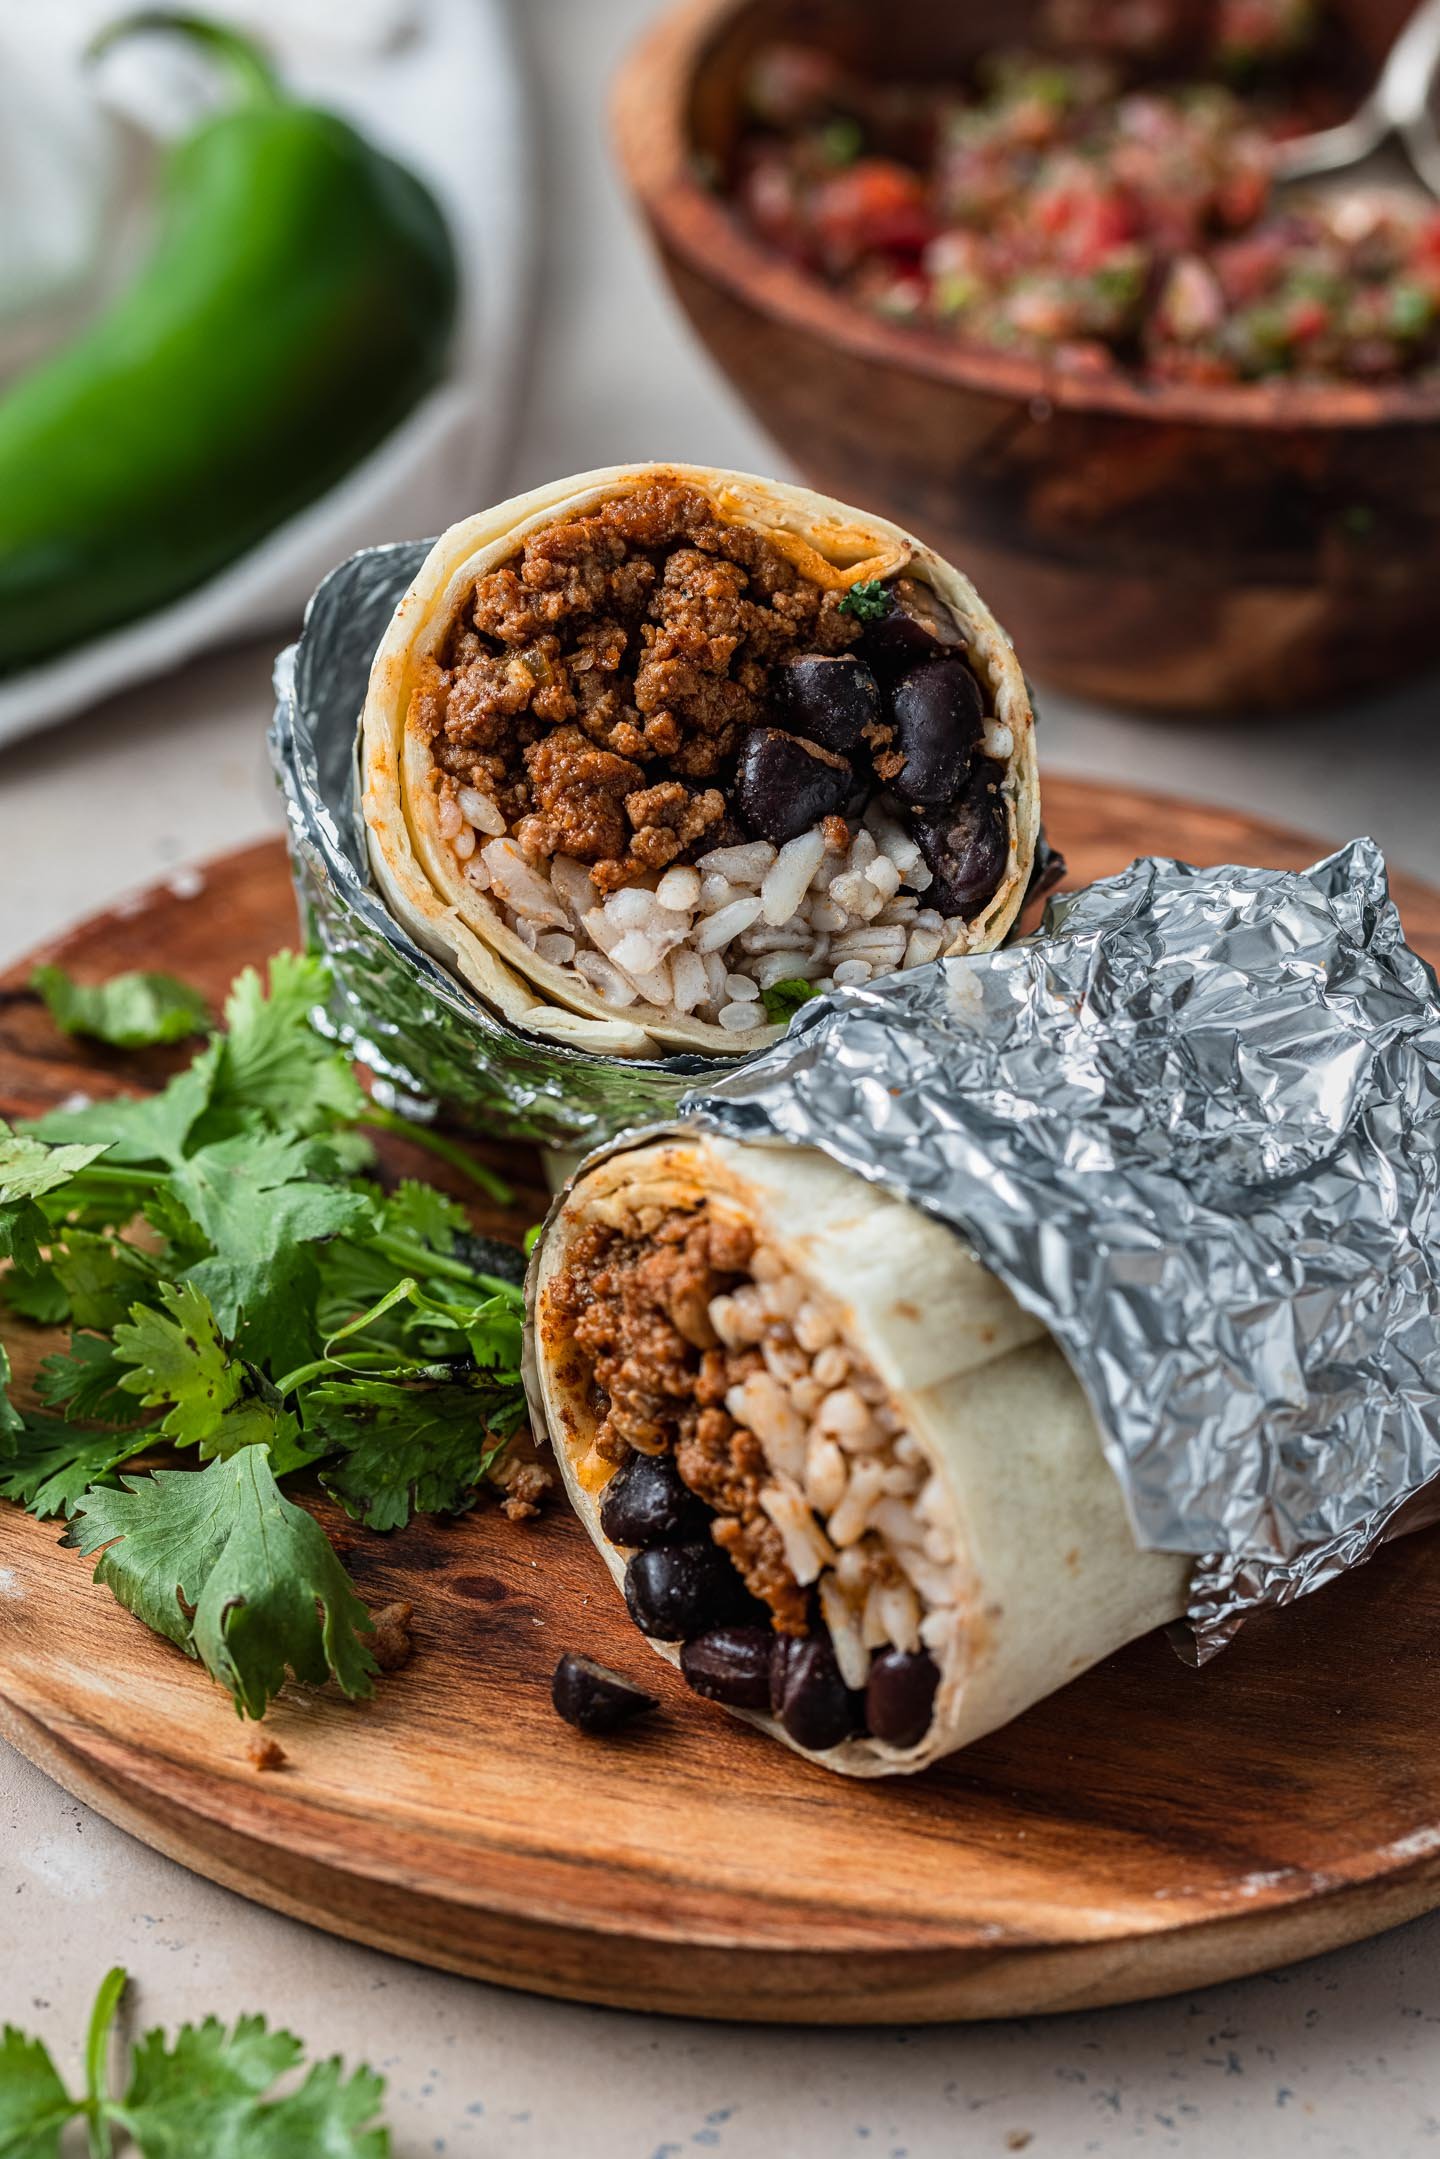 How to Reheat Burrito: Quick and Easy Tips